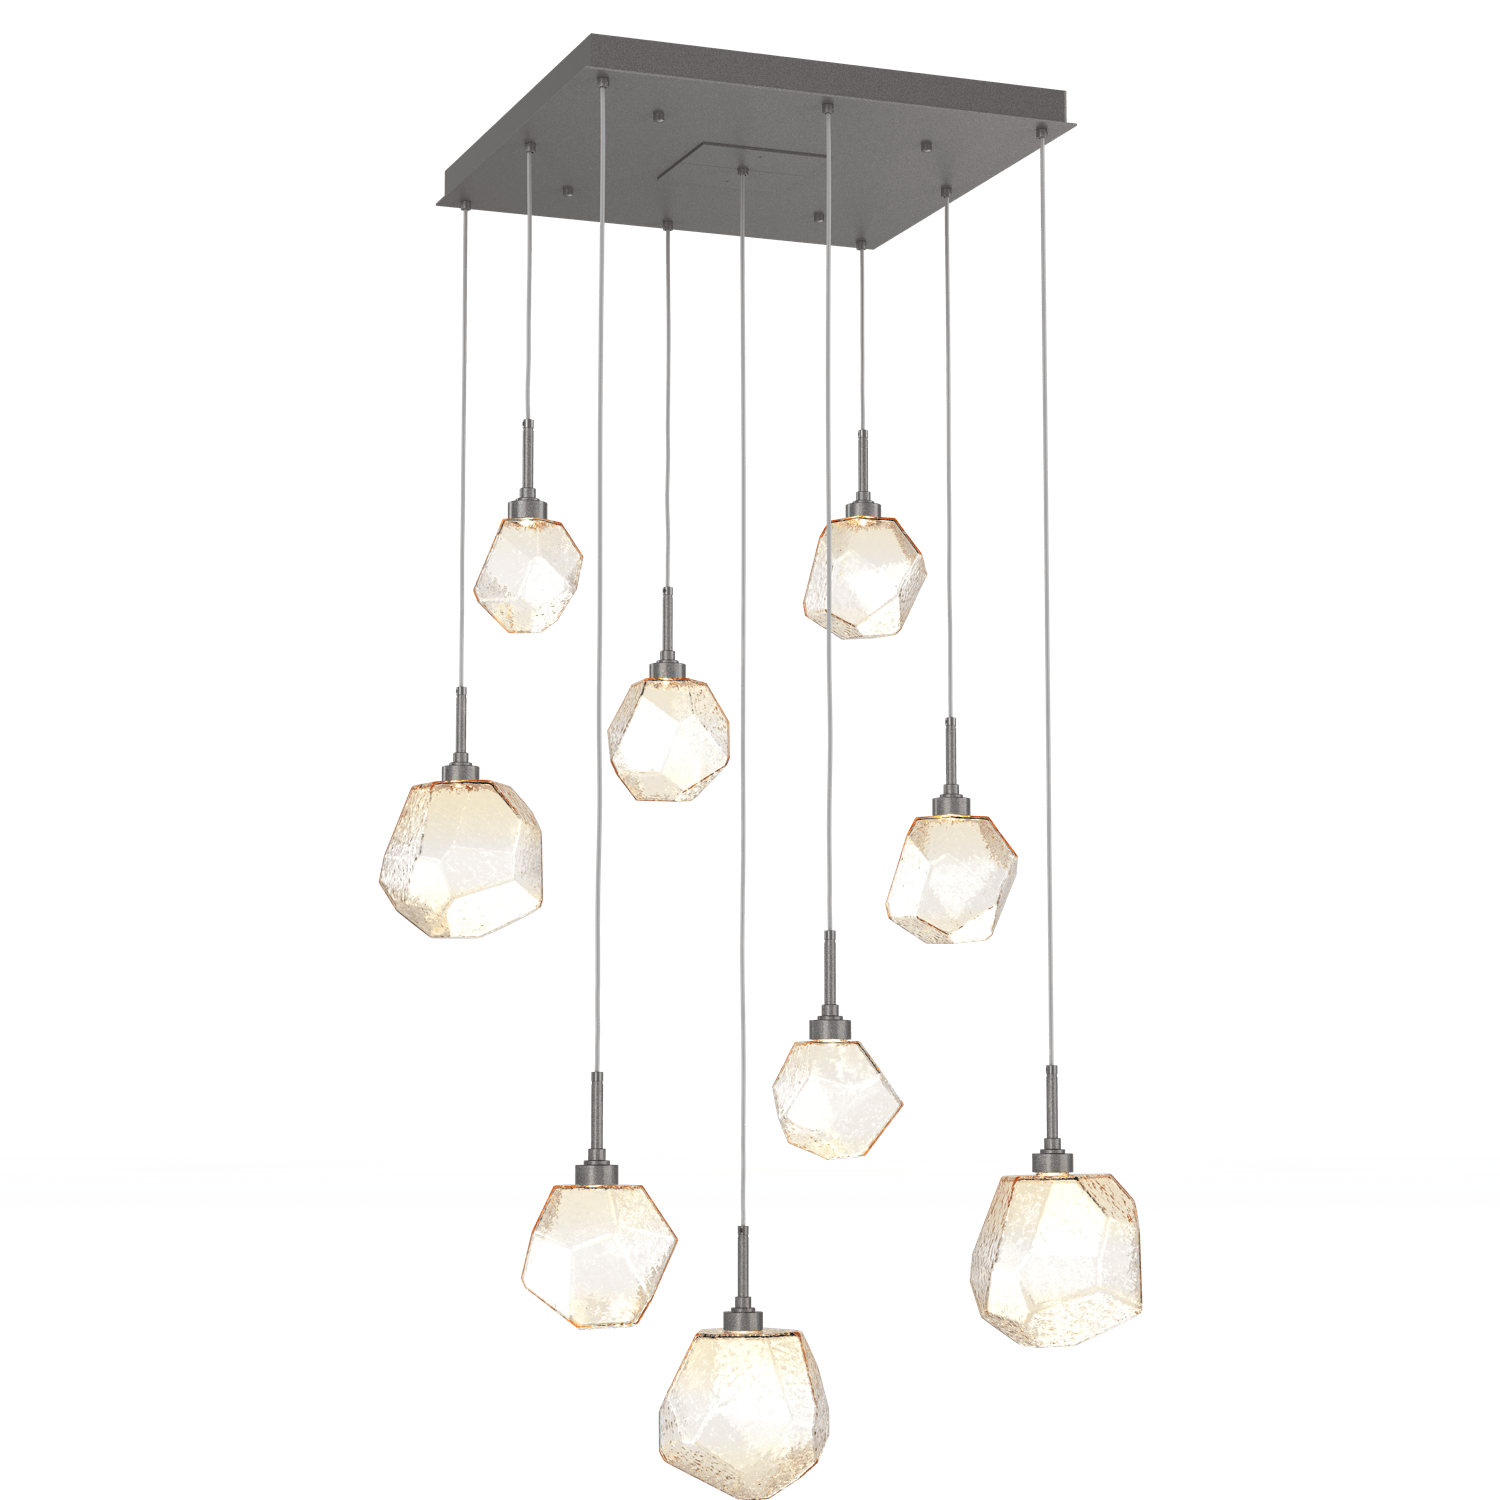 CHB0039-09-GP-A-Hammerton-Studio-Gem-9-light-square-pendant-chandelier-with-graphite-finish-and-amber-blown-glass-shades-and-LED-lamping